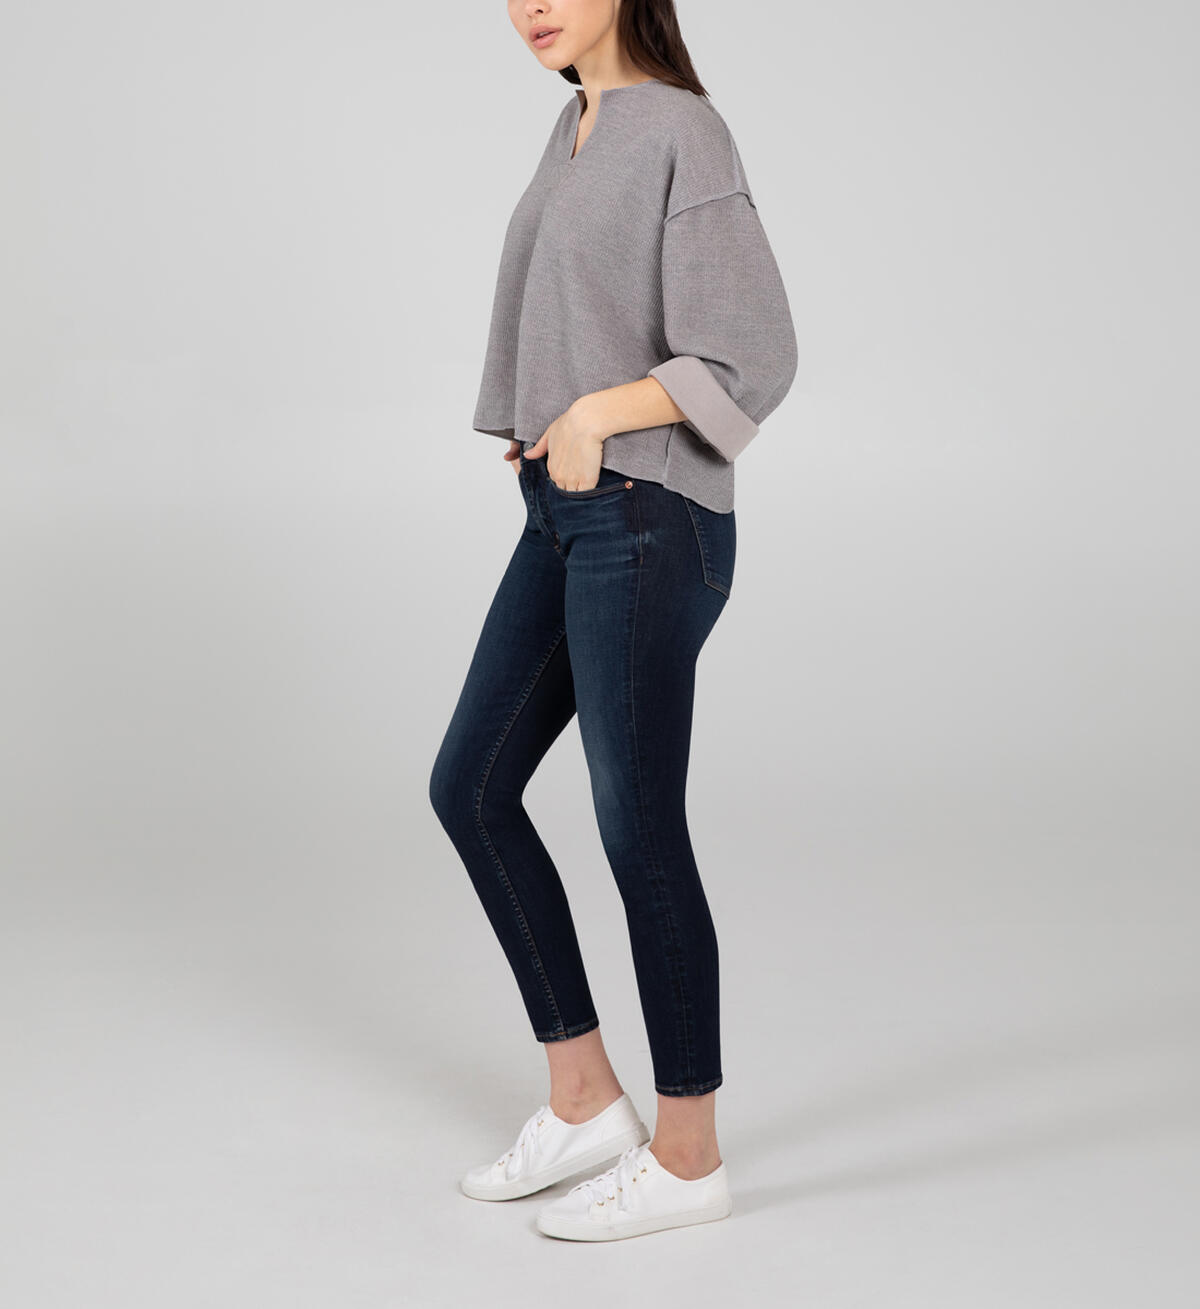 Most Wanted Mid Rise Skinny Jeans, , hi-res image number 2